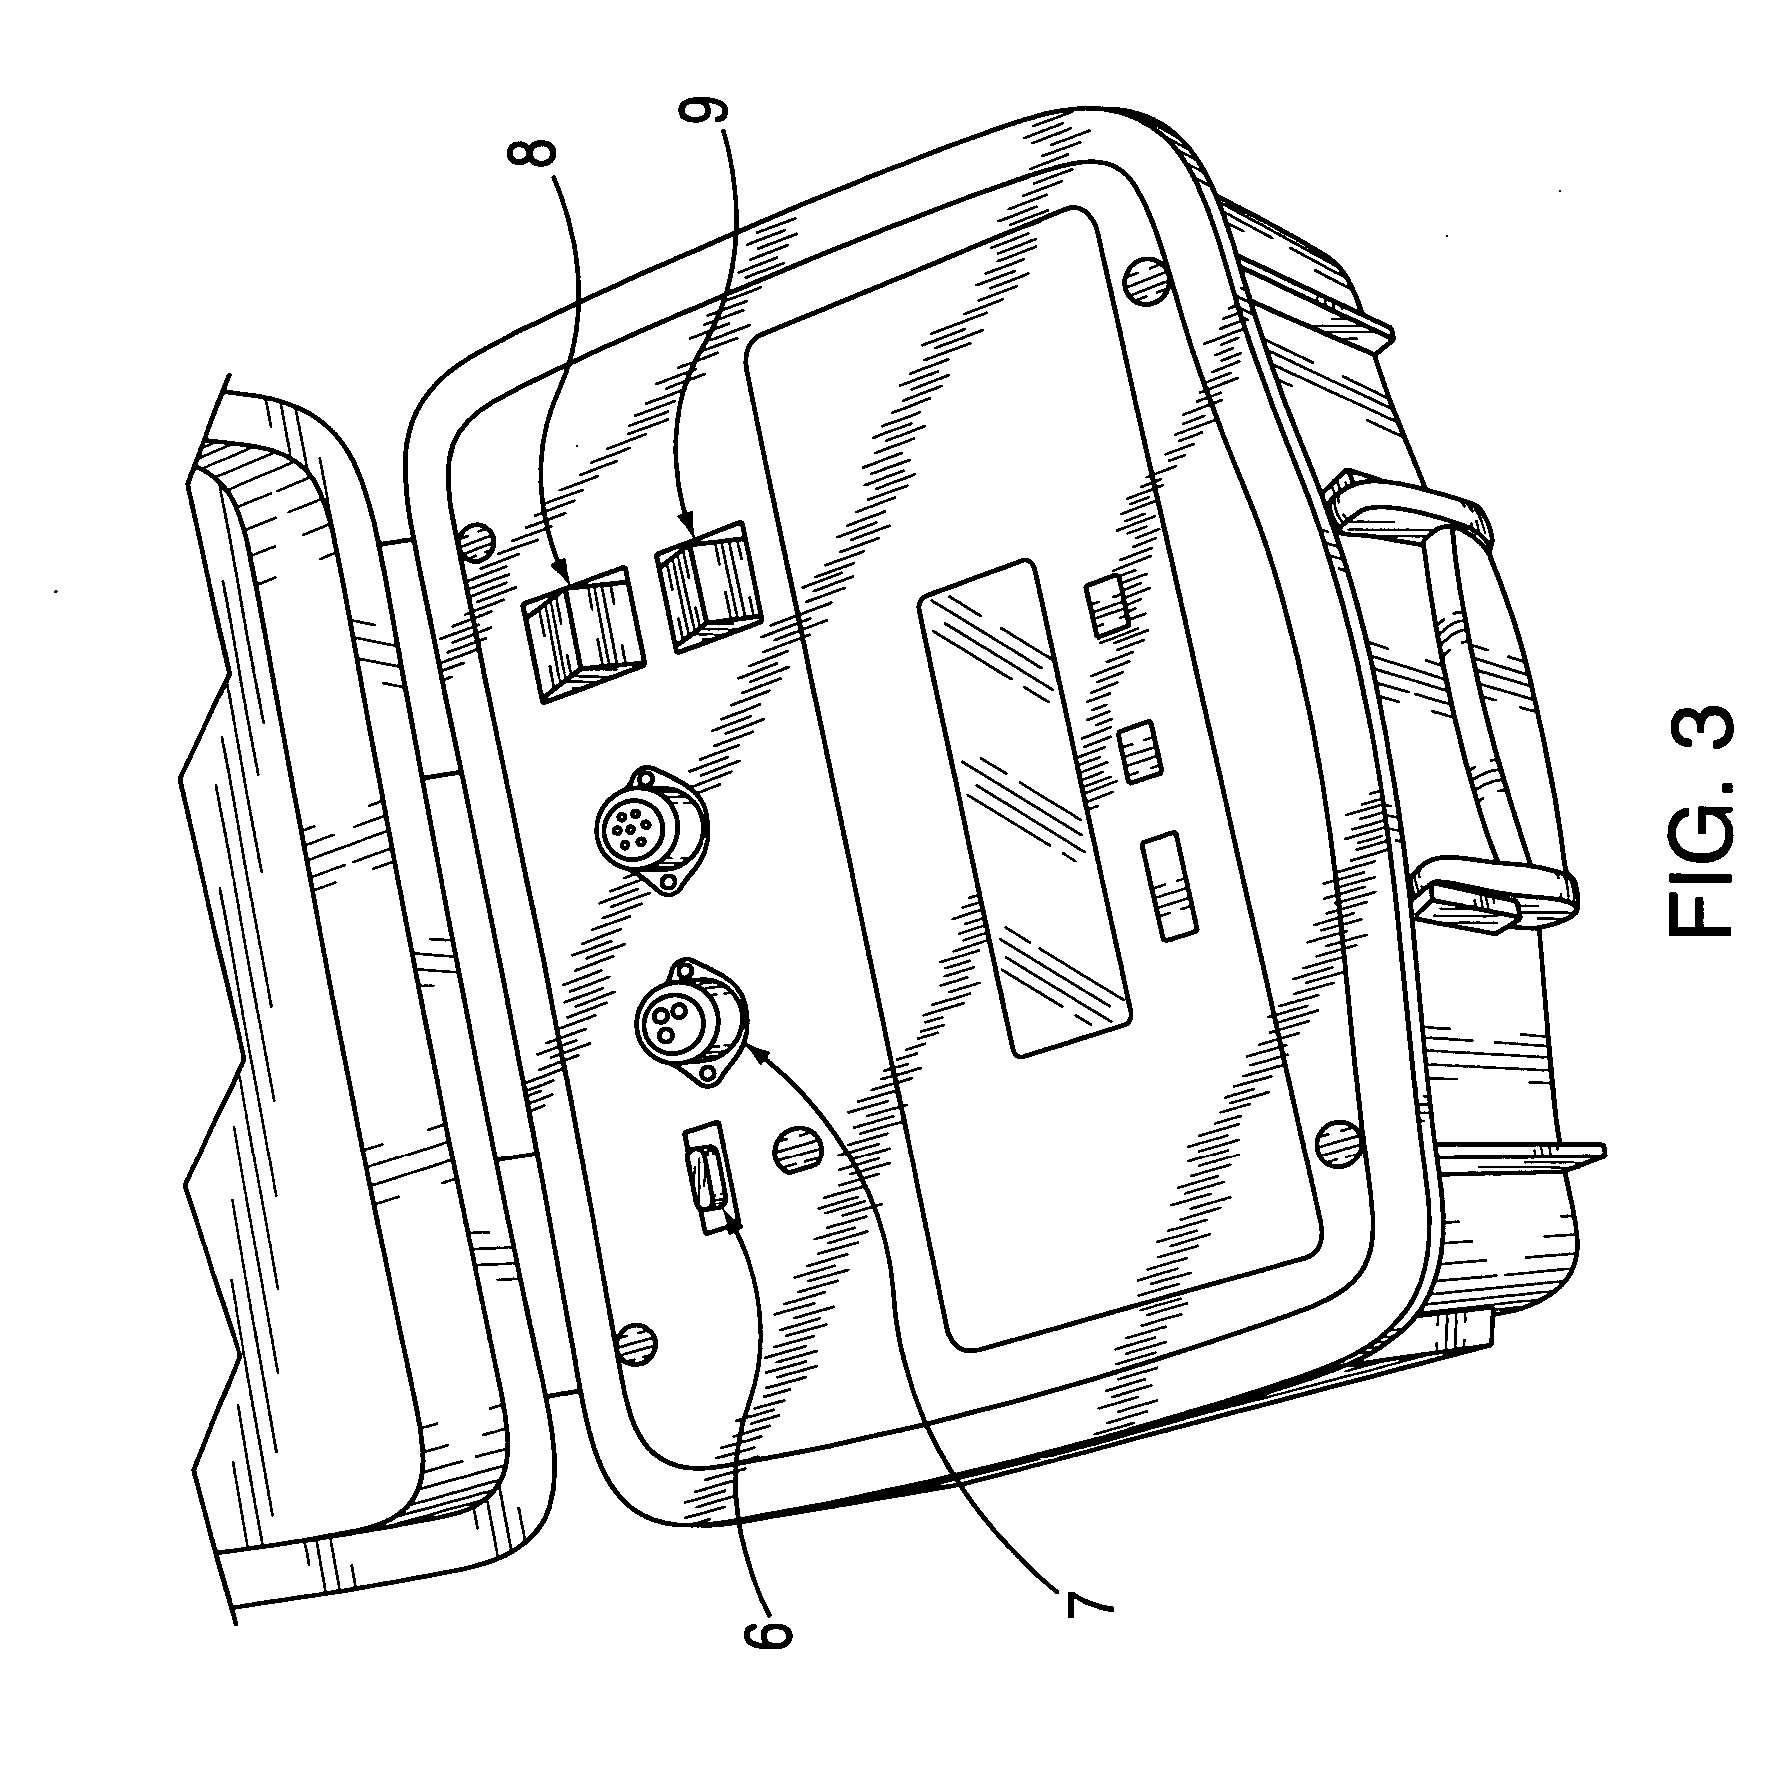 Battery management system and apparatus